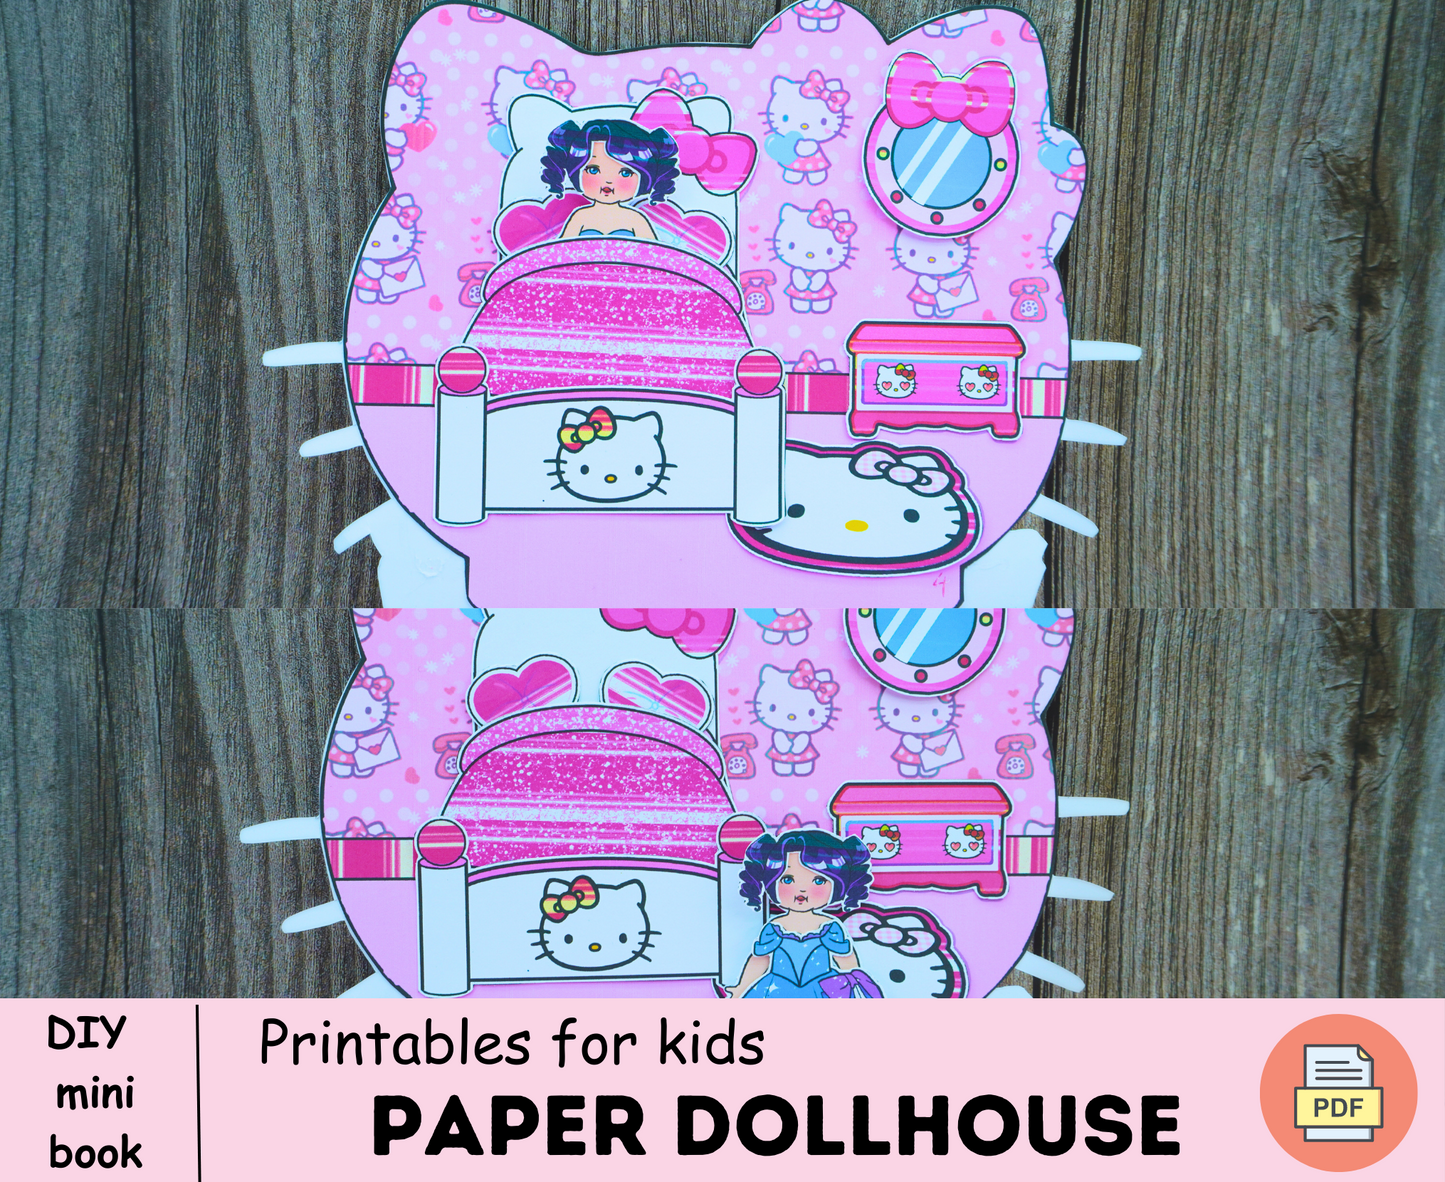 Mommy and Baby visit Hello Kitty House printables 🌈 DIY printable kit for kids | Easy busy book for toddler print 🌈 Woa Doll Crafts